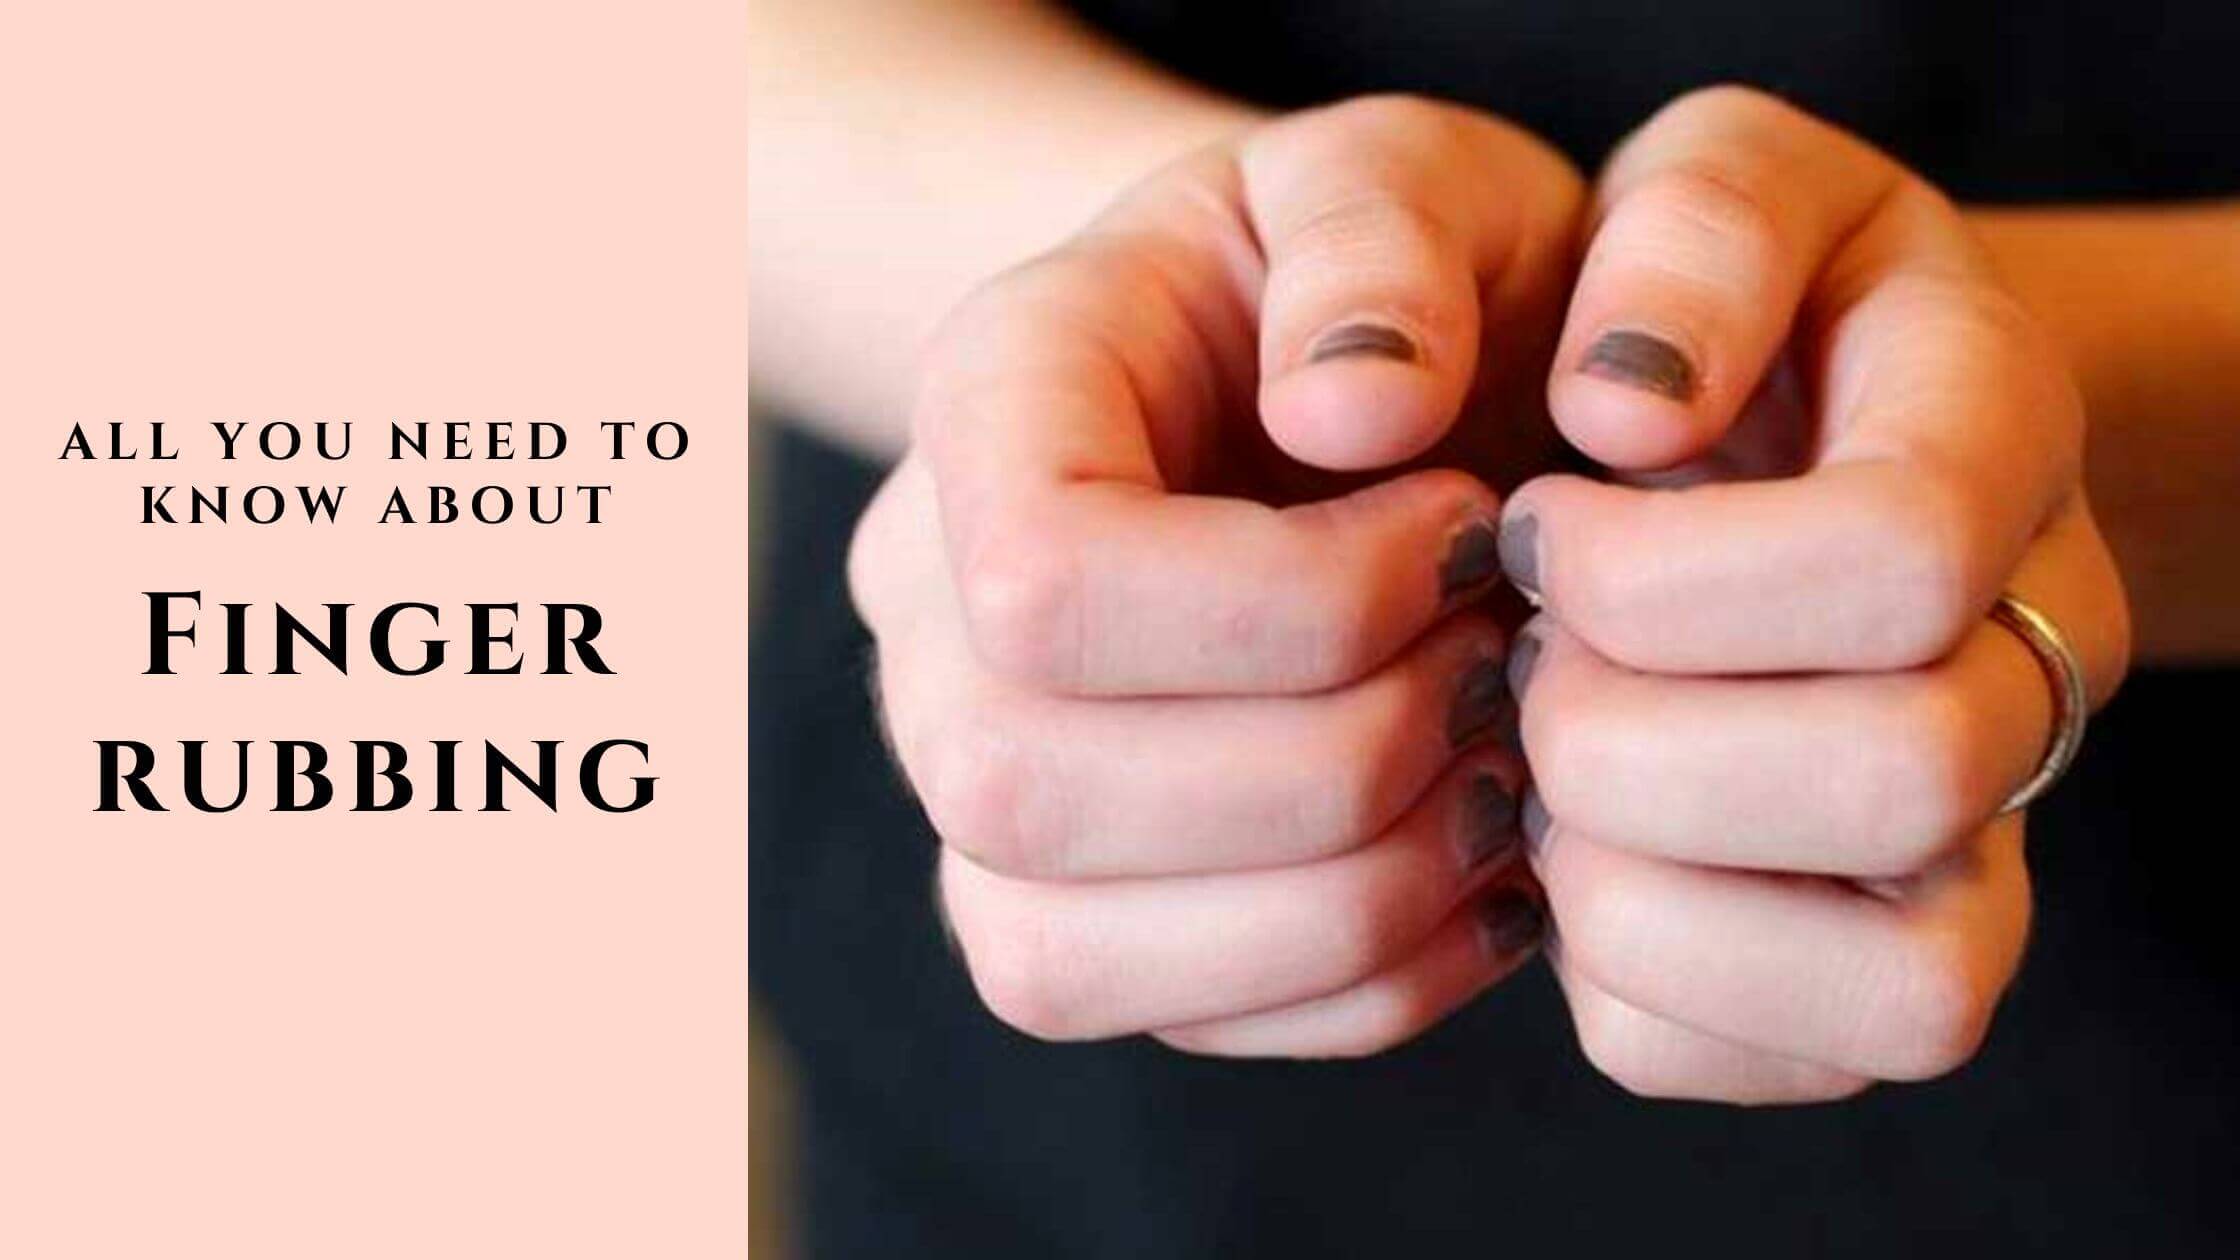 Fingernail rubbing - All You Need To Know it